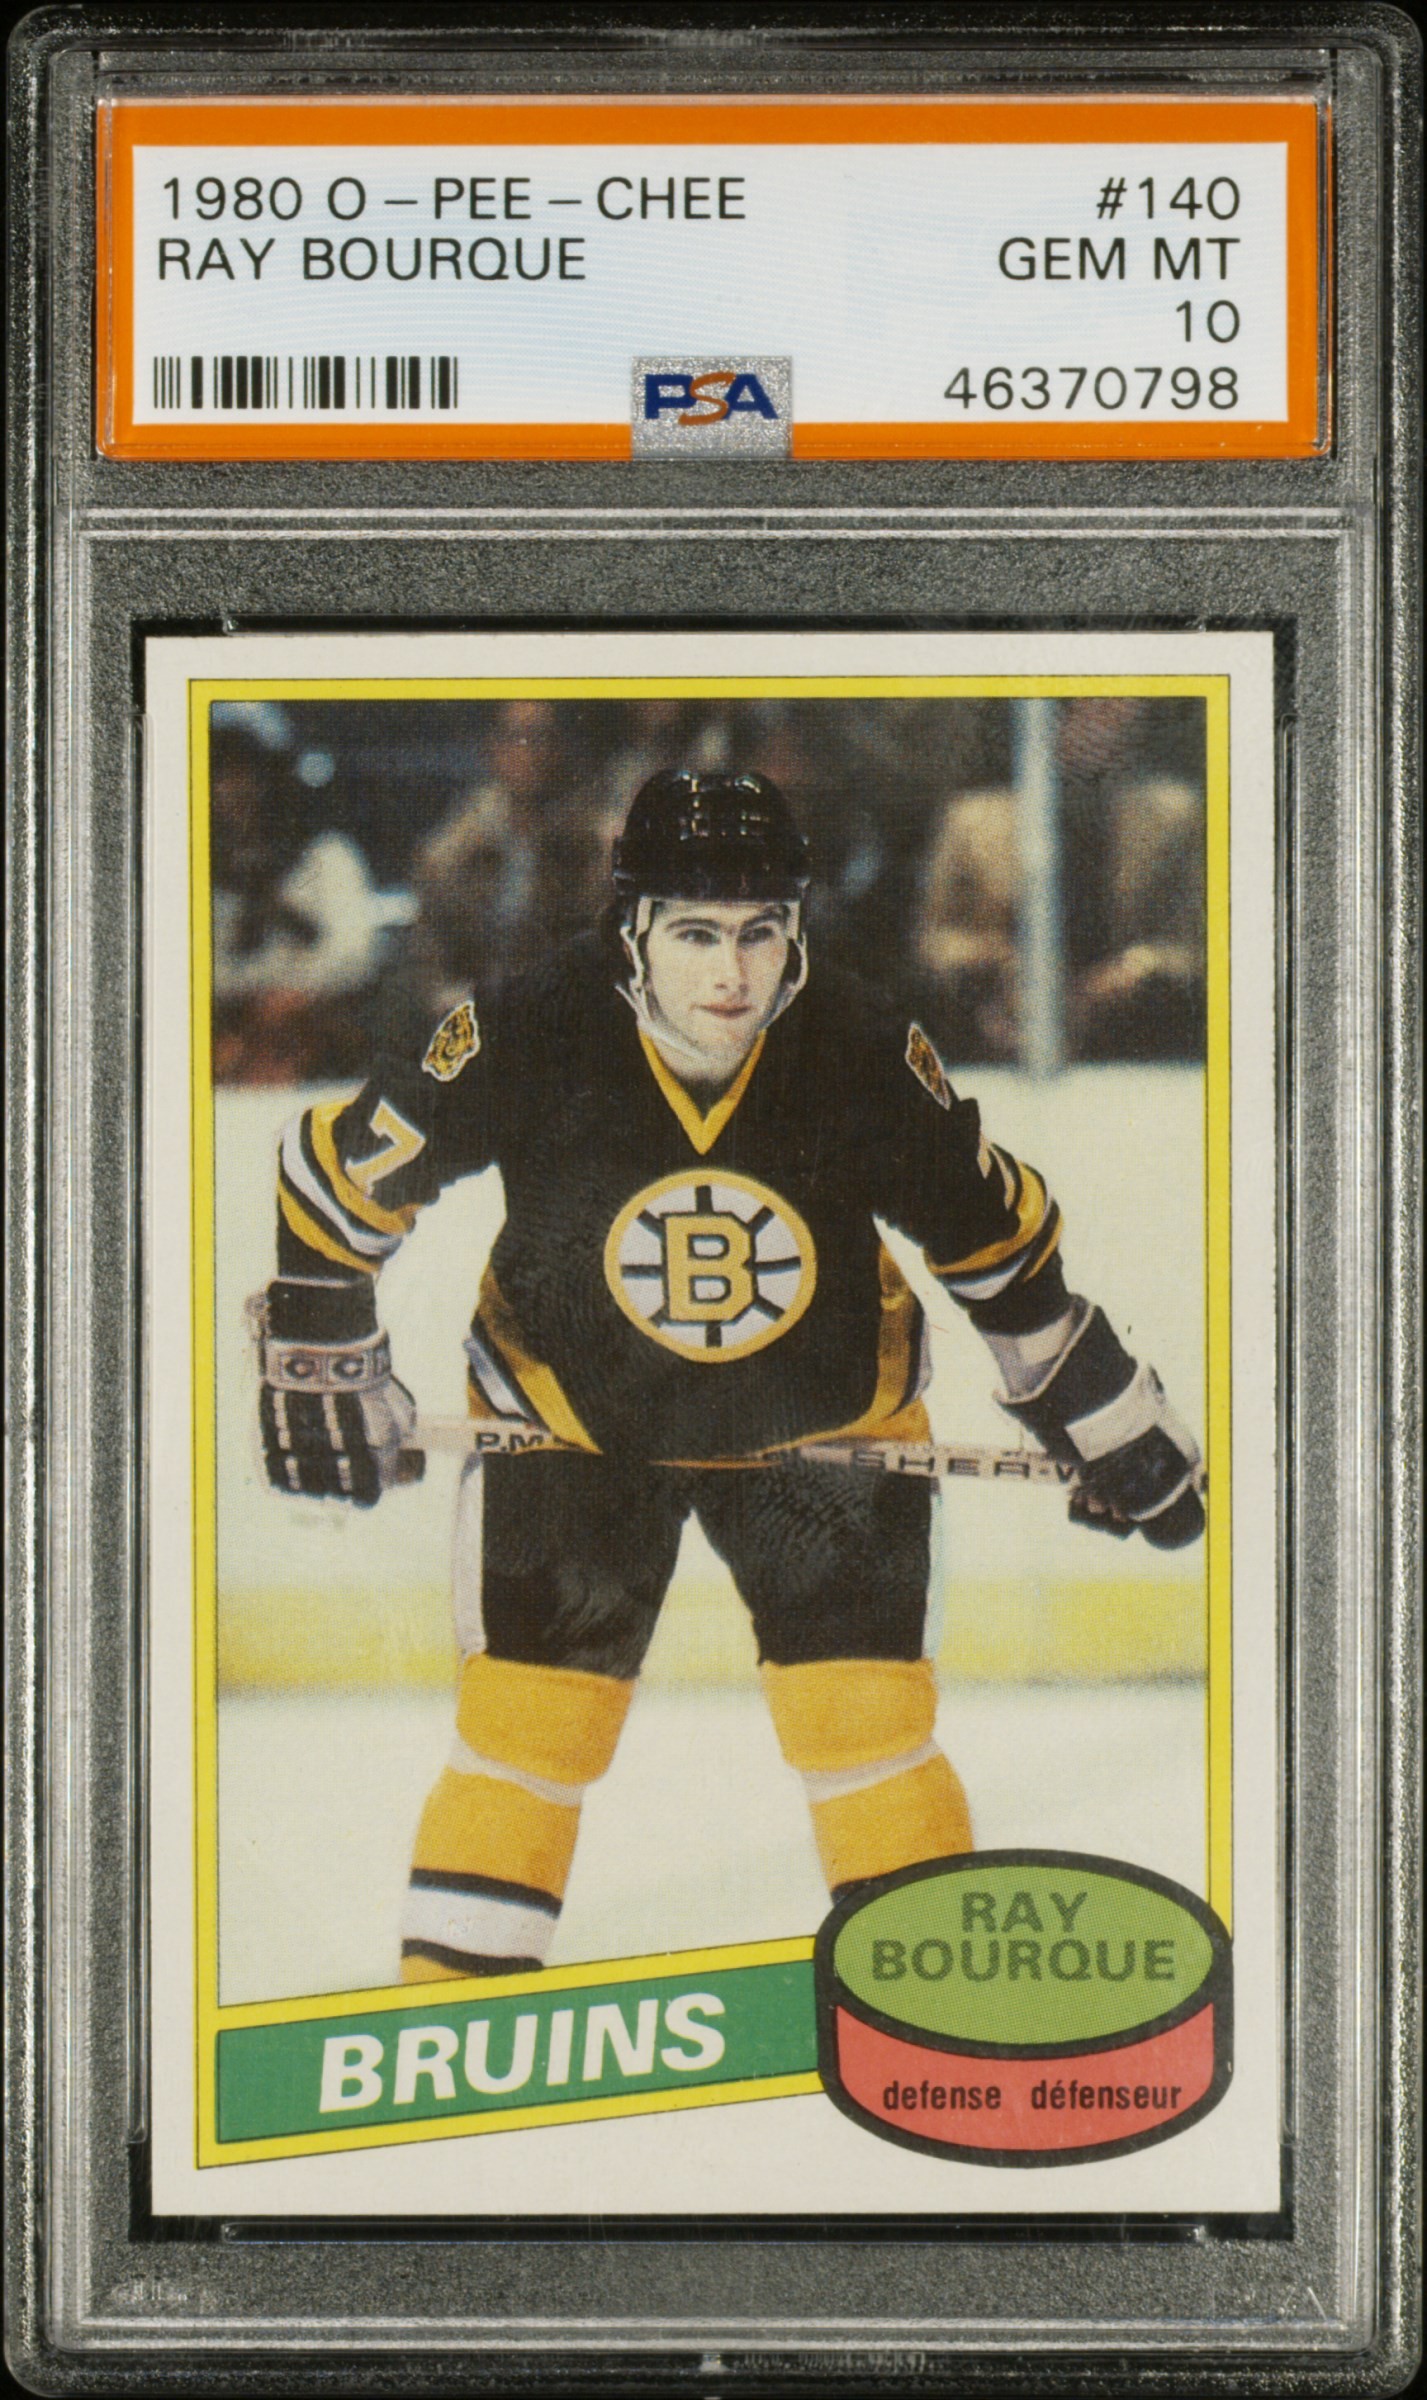 1980-81 O-Pee-Chee #140 Ray Bourque Rookie Card - PSA GEM MT 10
